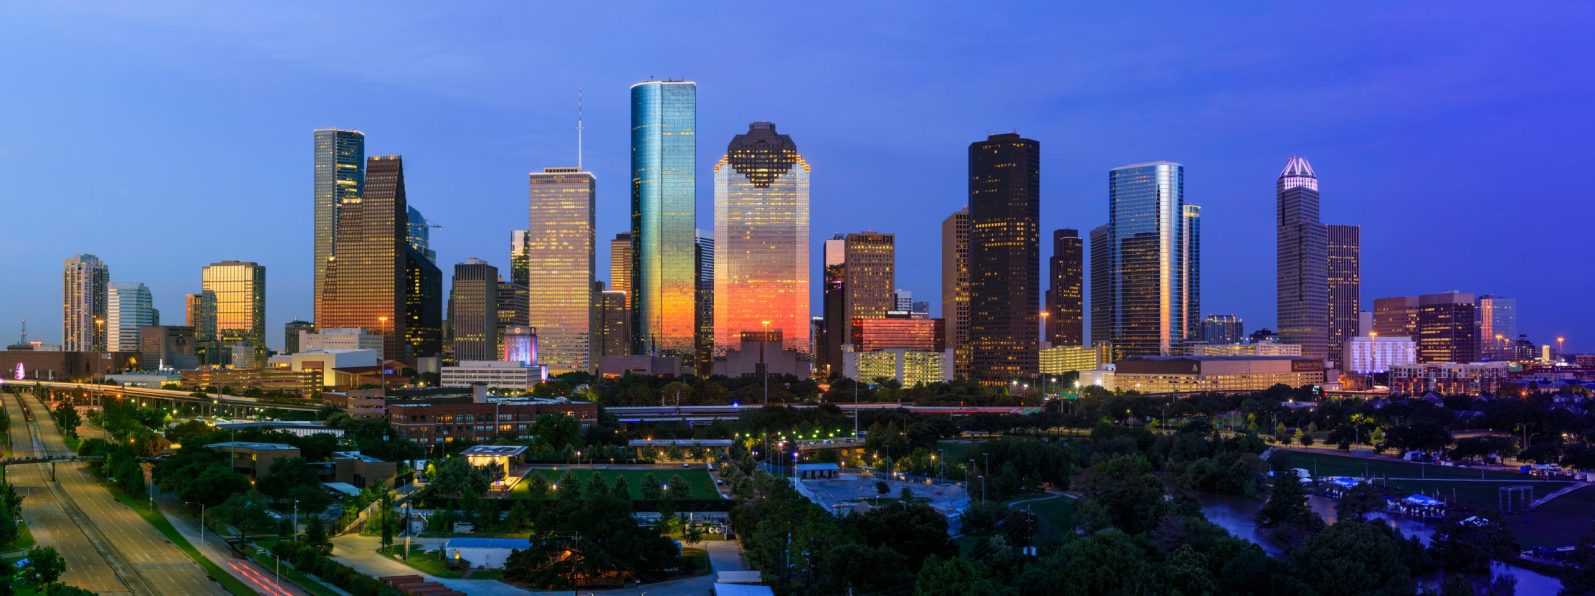 6 Romantic Things to Do in Houston on Valentine's Day